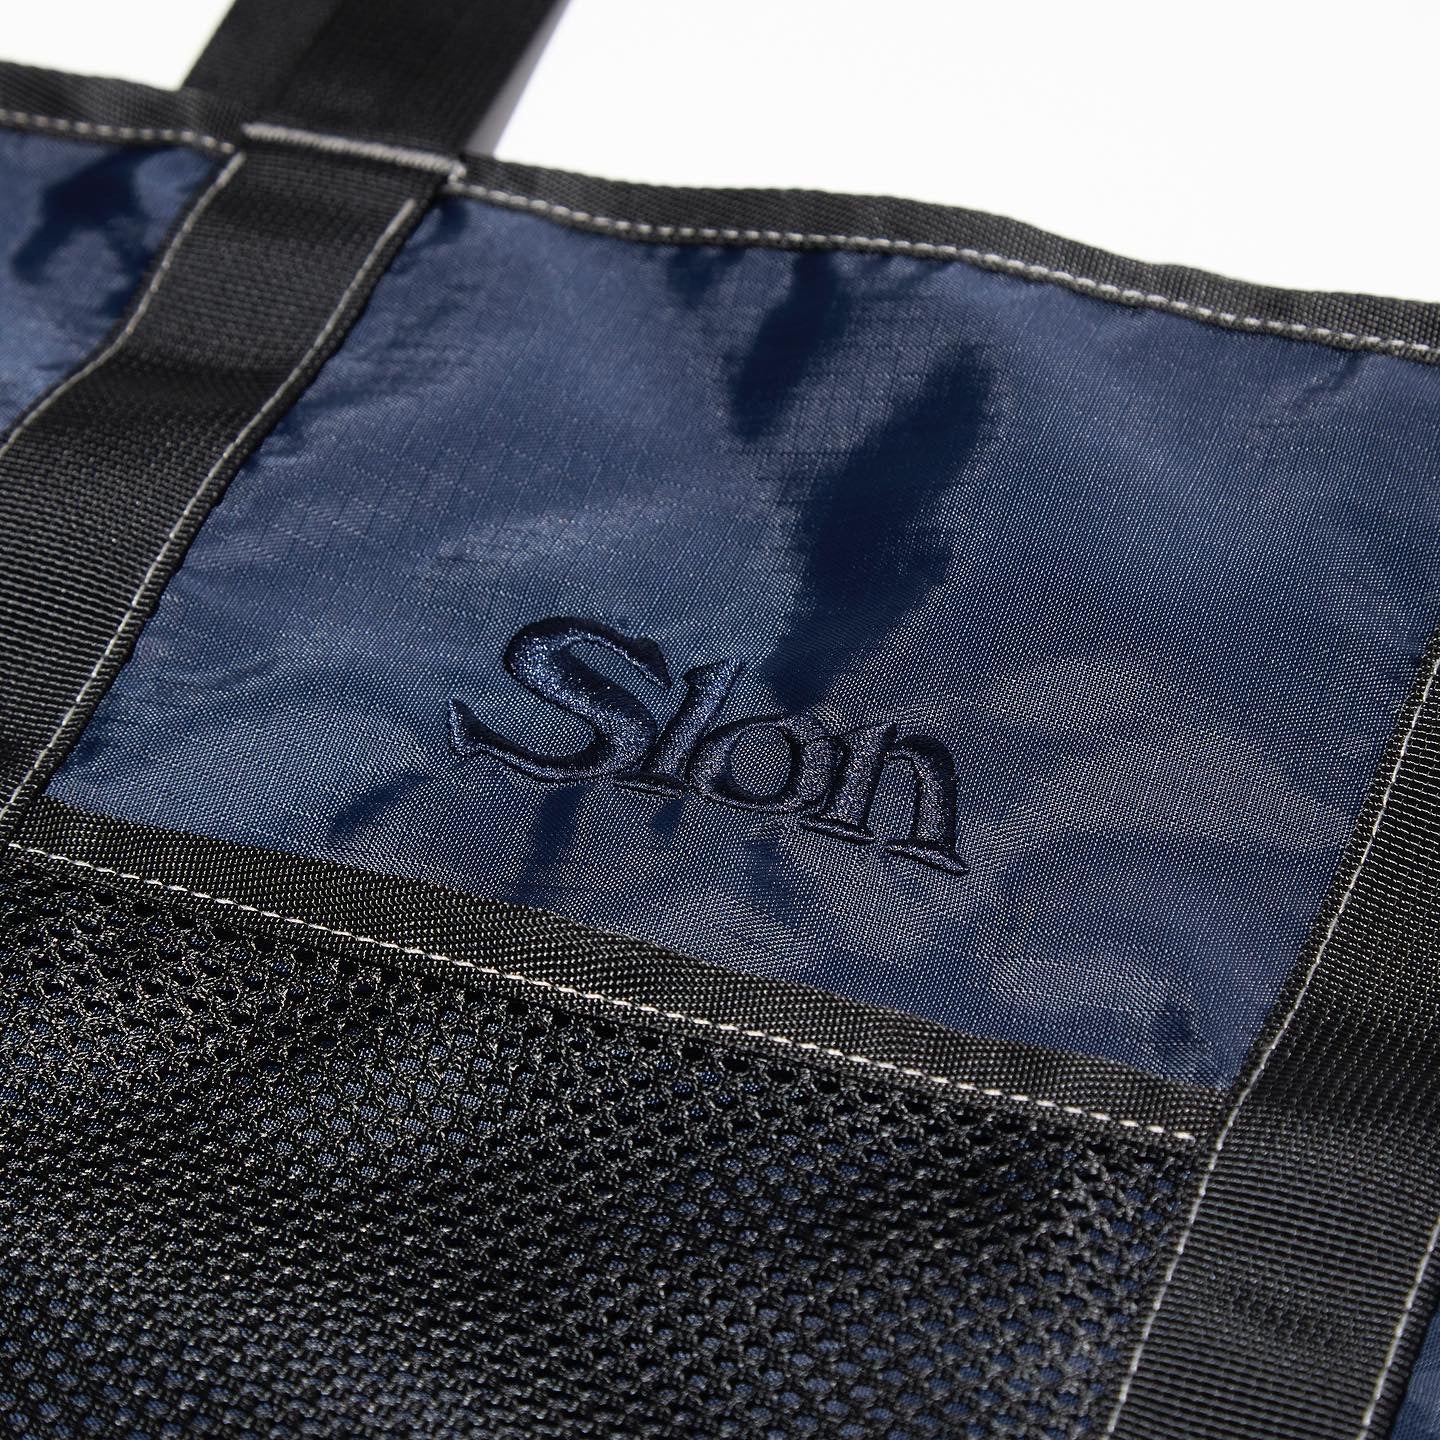 SLON x PACKING UTILITY TOTE 2